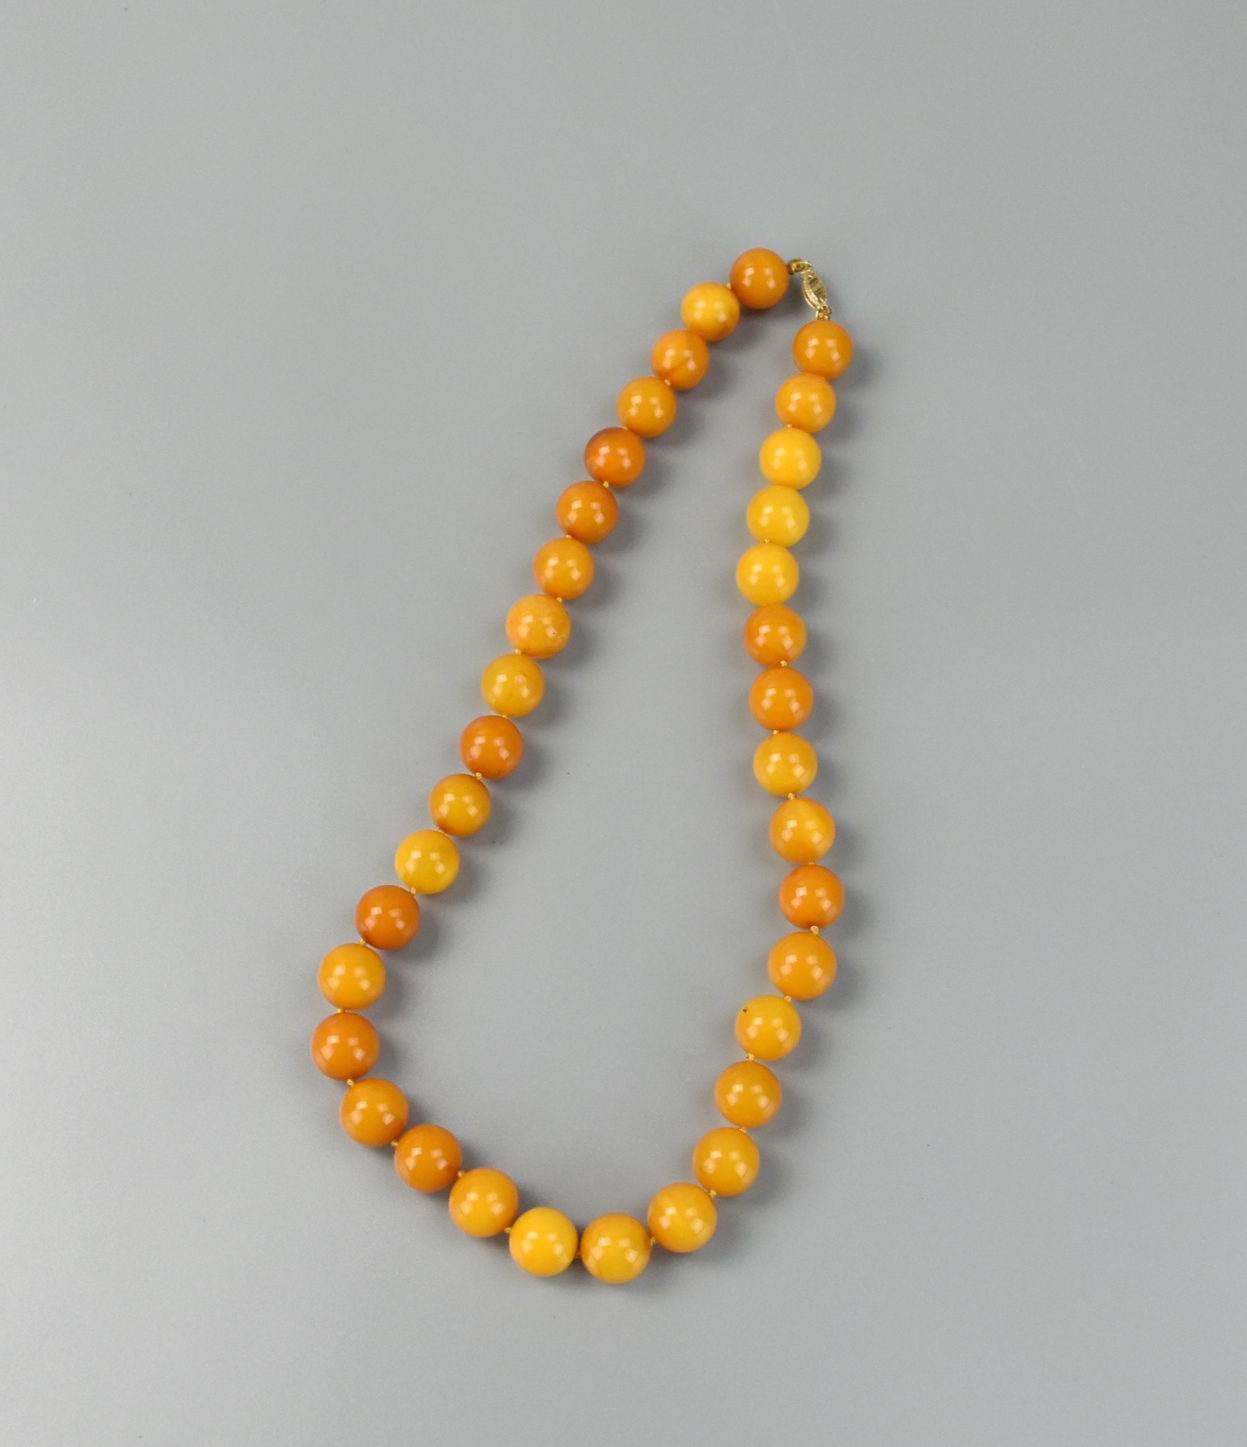 CHINESE BEADED BEESWAX NECKLACE 2ce937